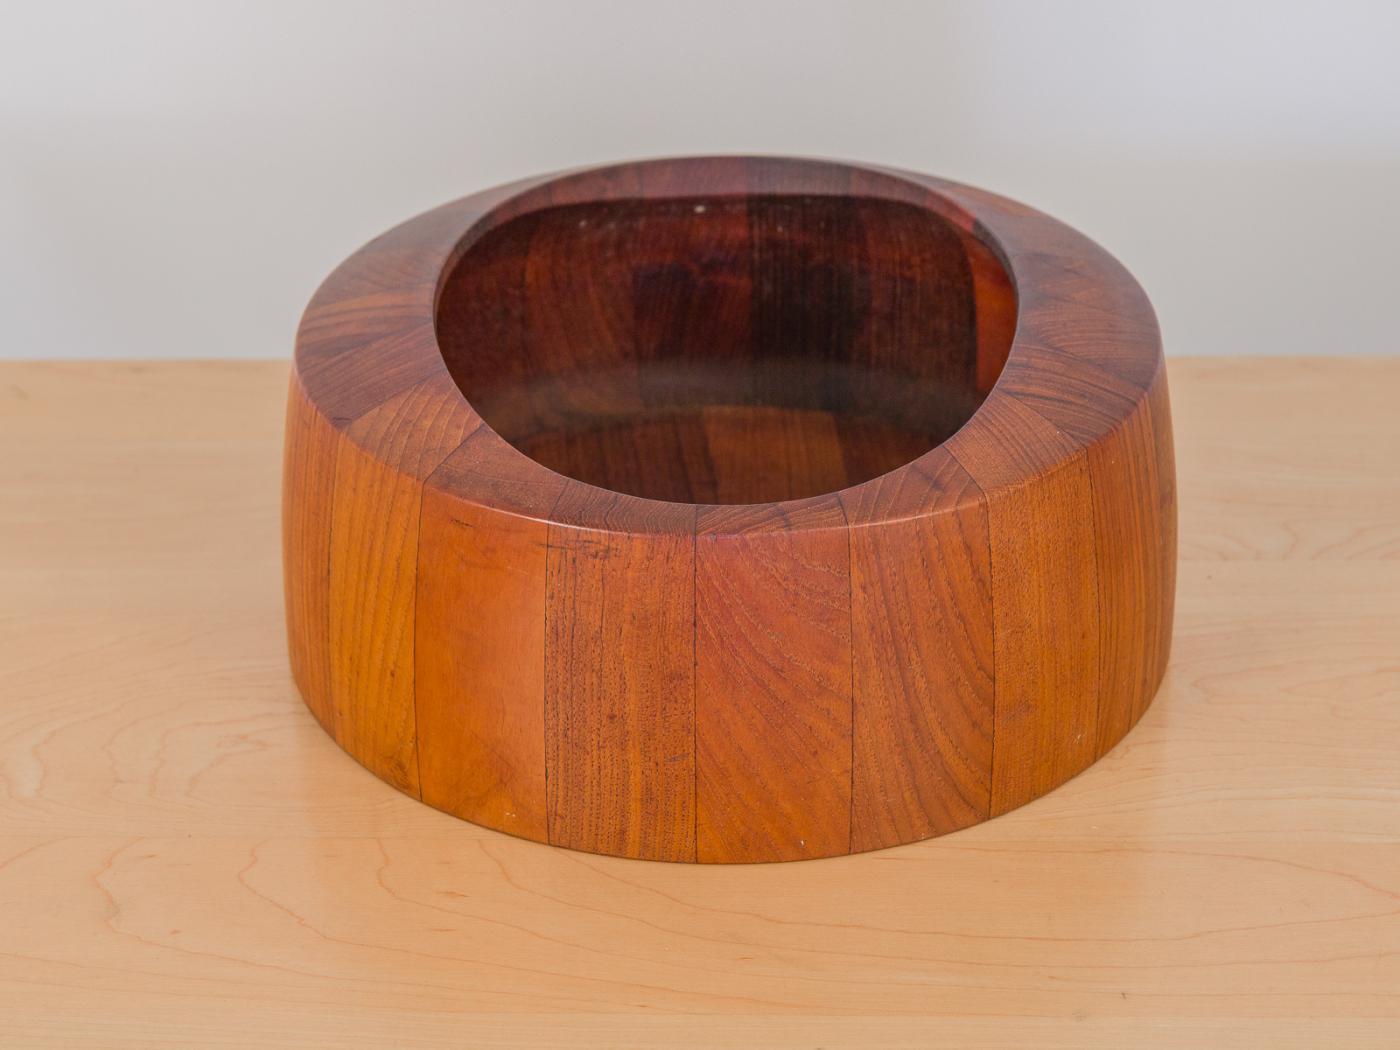 Early 1960s Danish modern teak bowl by Jens Quistgaard for Dansk. Staved wood grain panel and oval opening is wonderfully polished and attractive to admire. Early marking of Dansk Design Denmark IHQ on the underside.